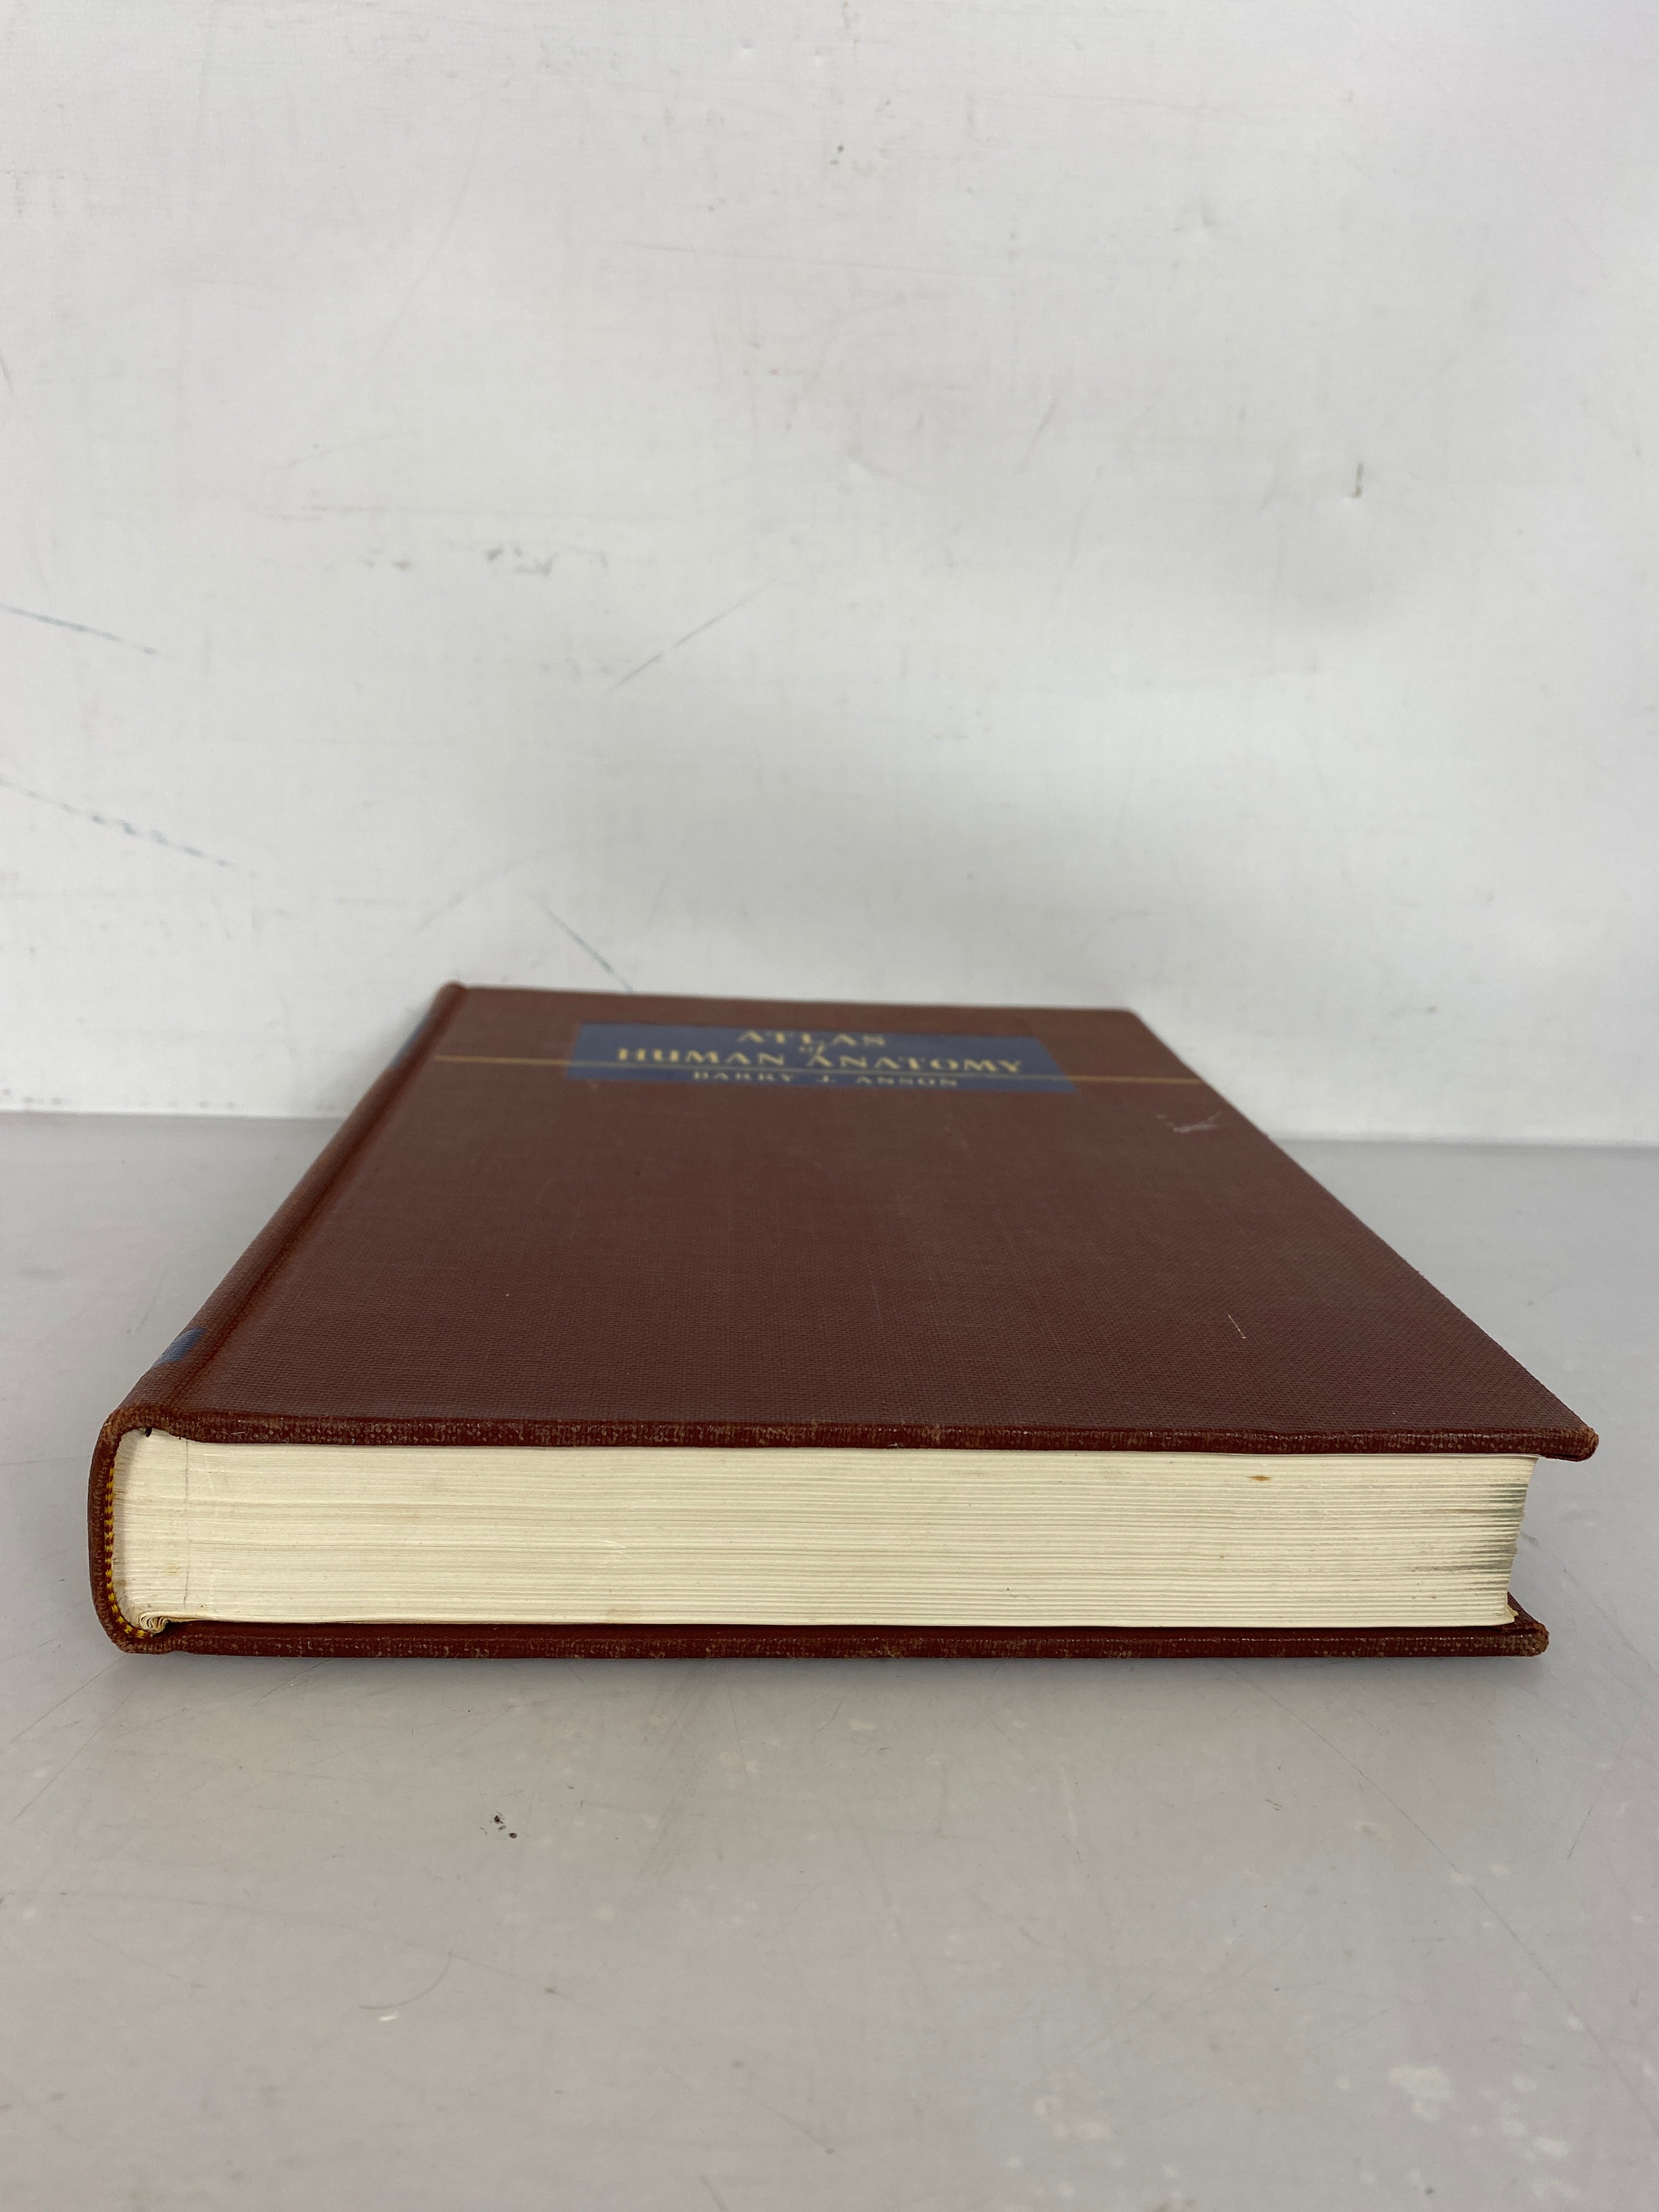 Atlas of Human Anatomy by Barry Anson 1950 First Edition HC